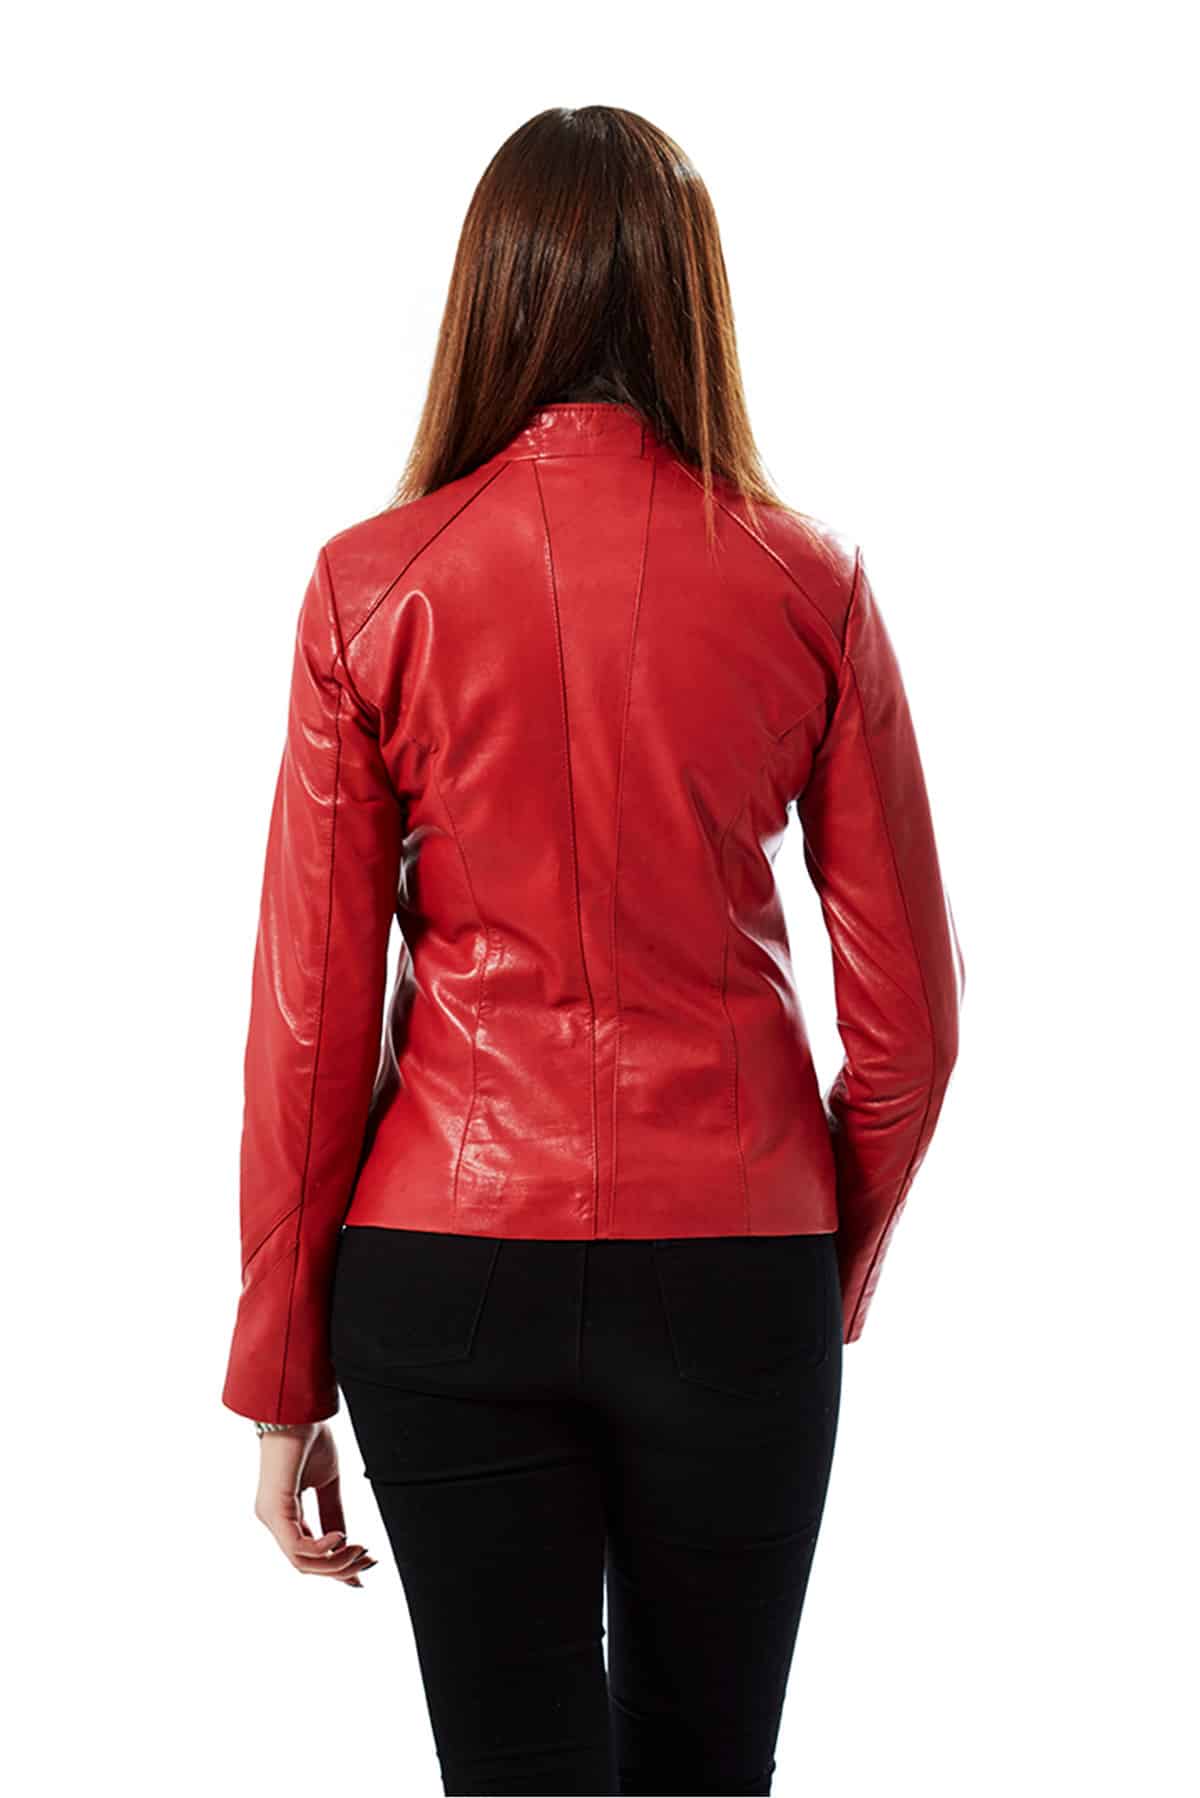 Red Leather Jackets Men & Women - 100% Premium Leather In Europe